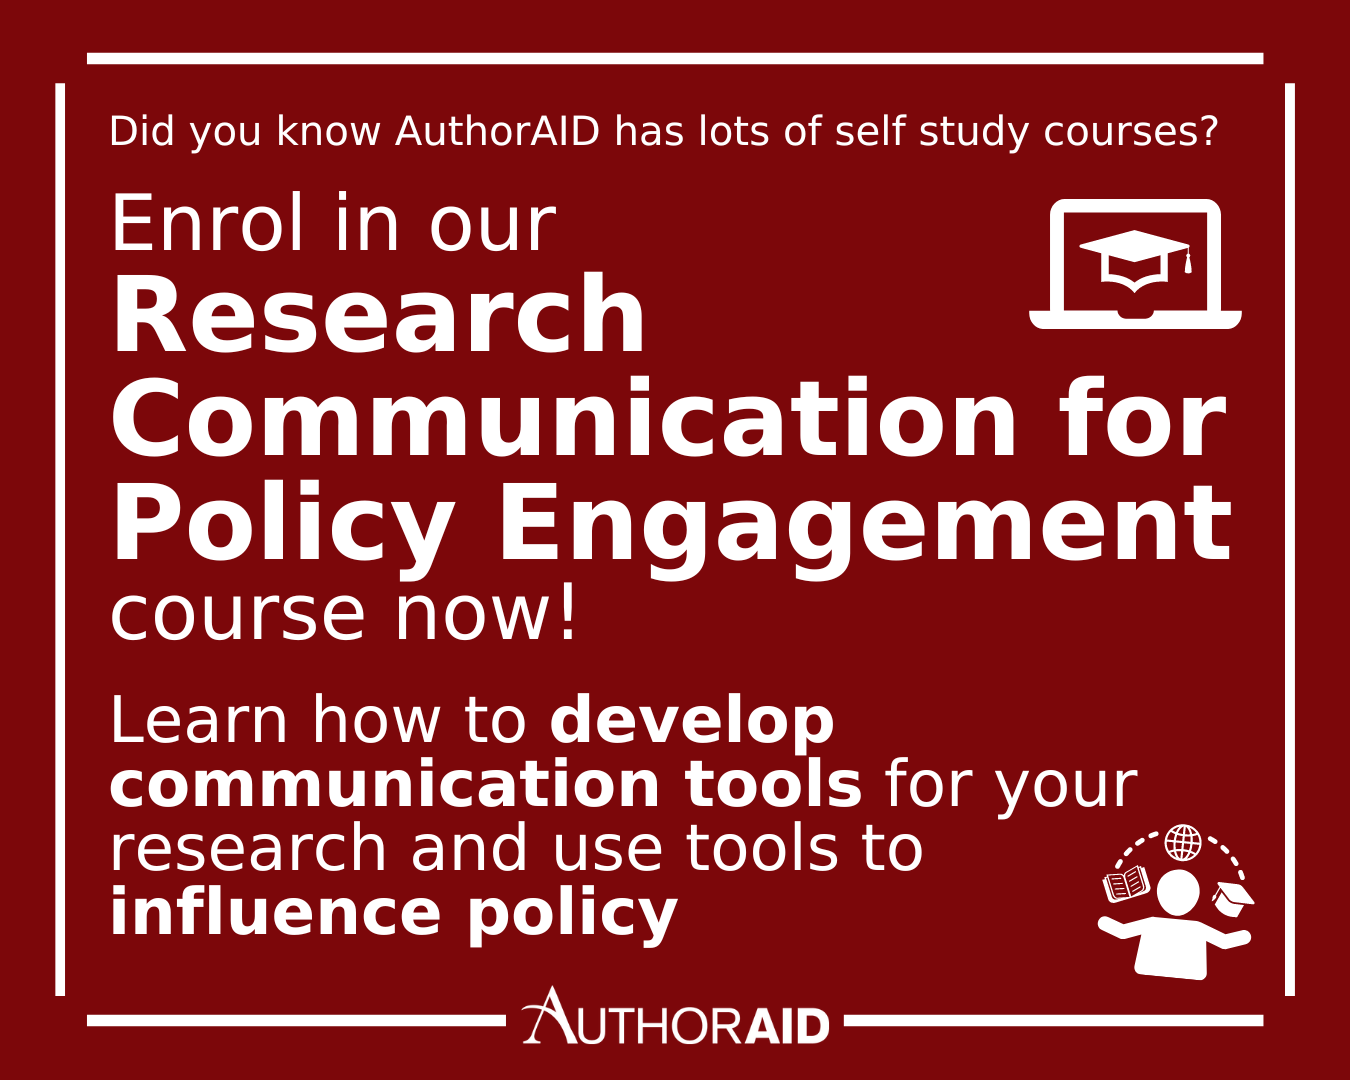 AuthorAID graphic - red background and all text in white. The AuthorAID logo is at the bottom, and a white straight border surrounds all the text. The text reads 'Did you know that AuthorAID has lots of self study course? Enrol in our Research Communication for Policy Engagement course now! Learn how to develop communication tools for your research and use tools to influence policy' 